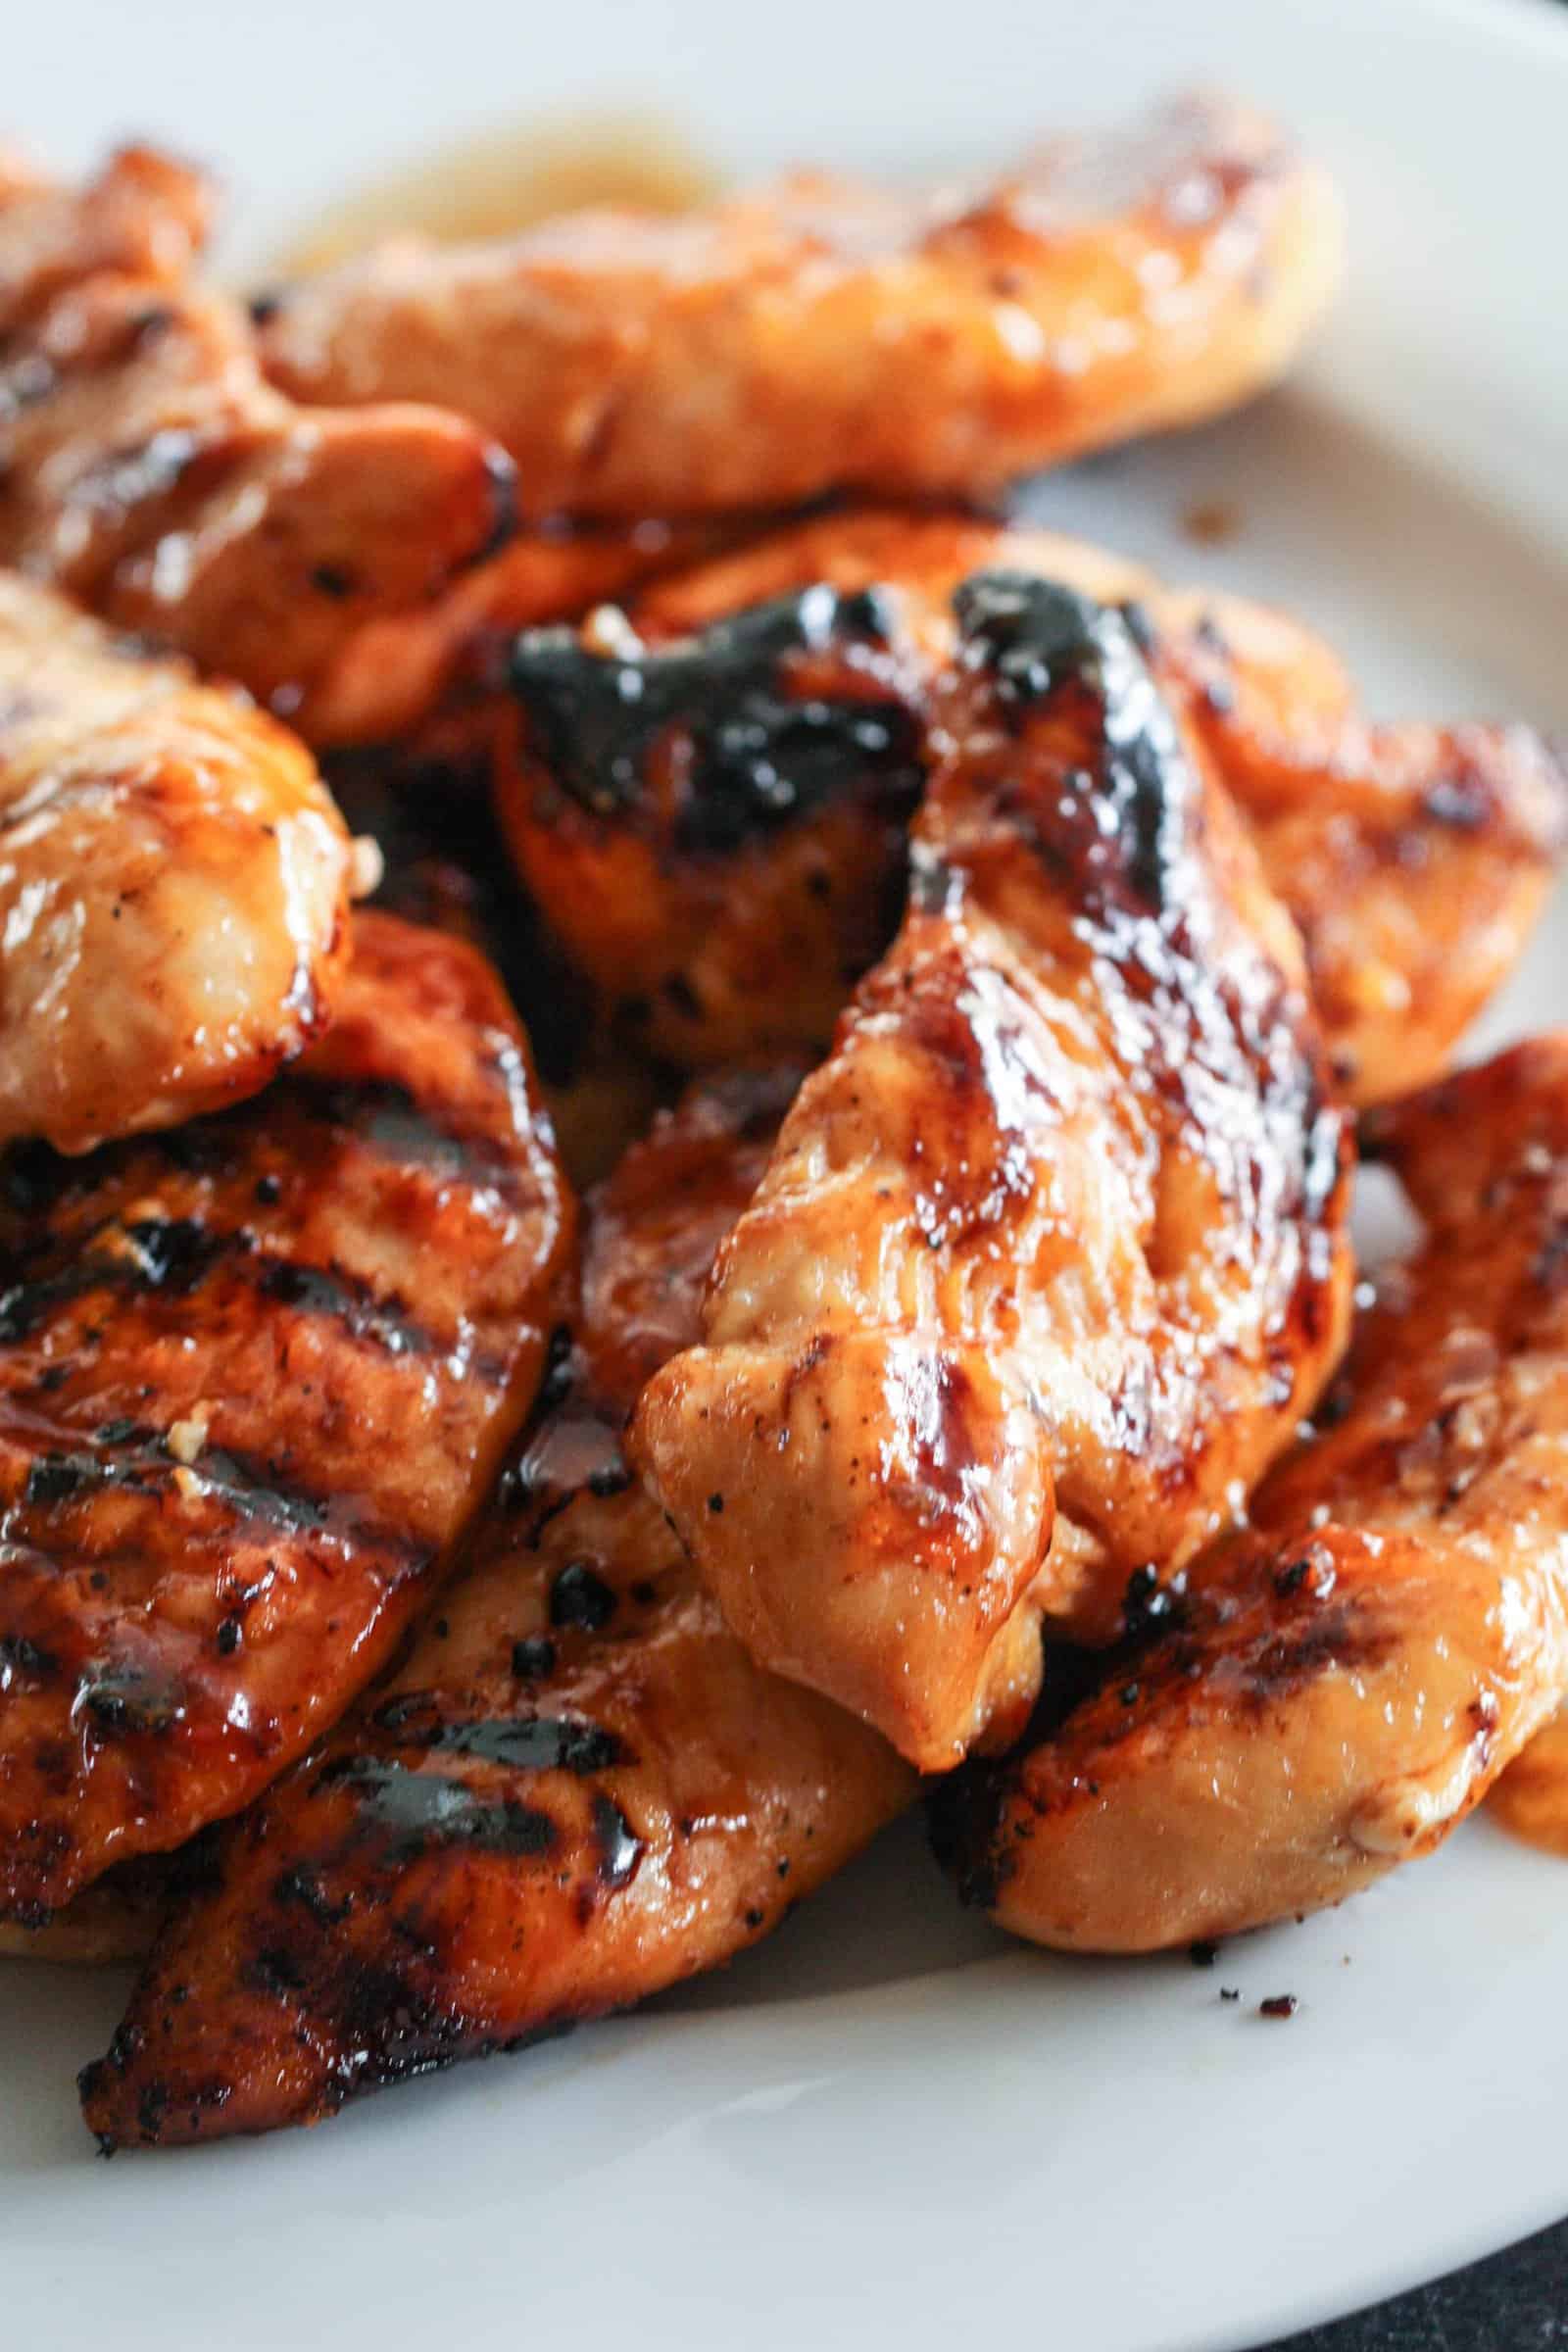 Discover the best BBQ recipes for your next cookout, from grilled chicken and salmon on the grill to mouth-watering BBQ ribs and homemade BBQ sauce.